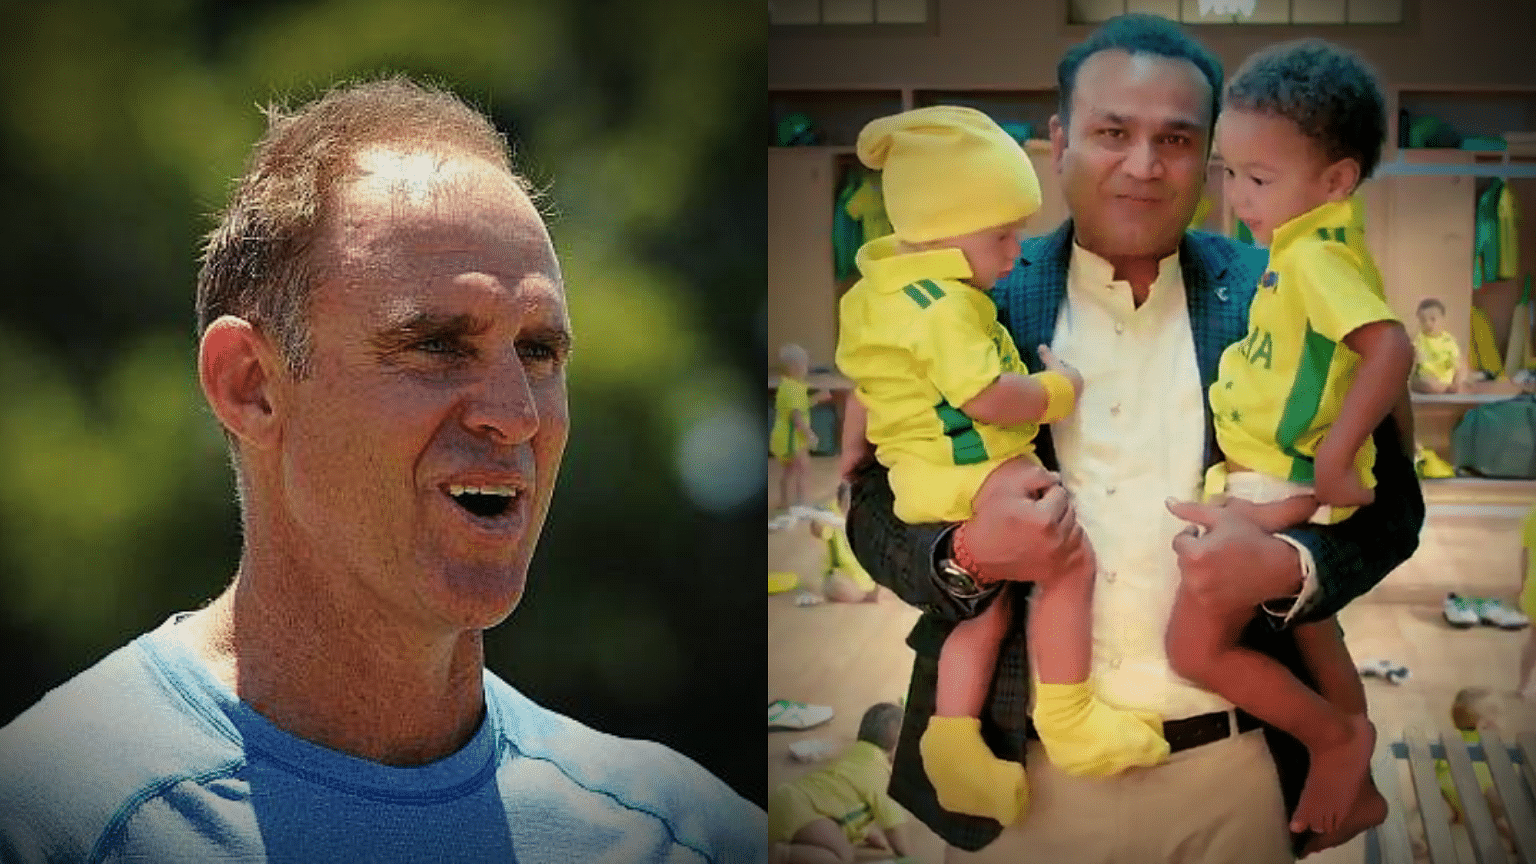 Matthew Hayden was quick to react to Virendra Sehwag’s babysitting commercial.